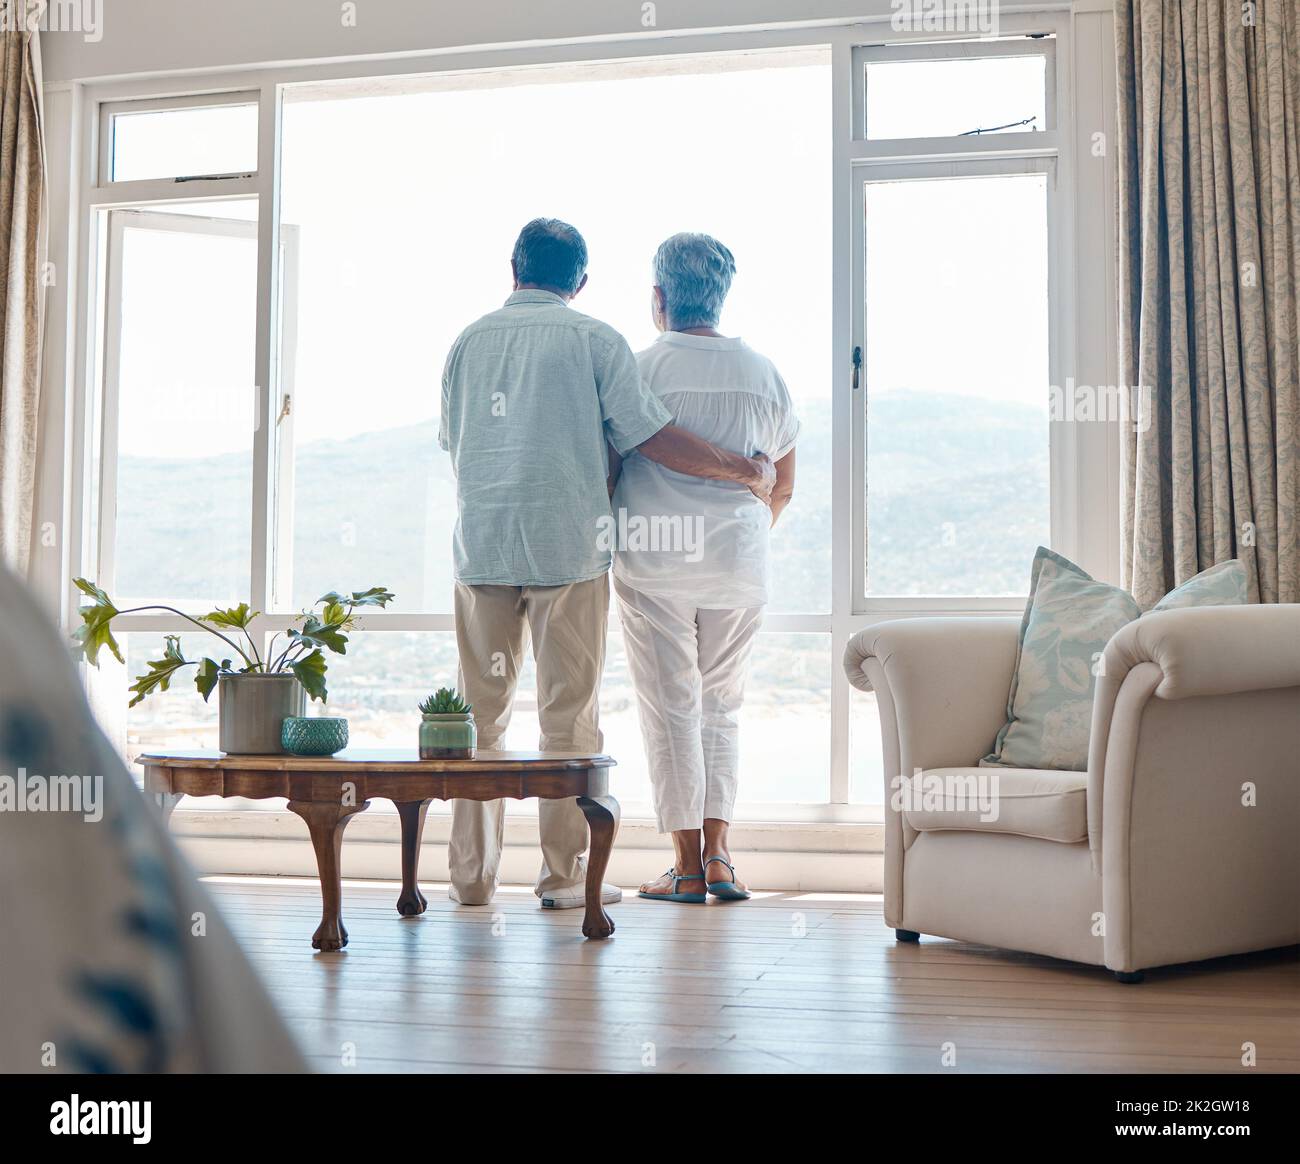 Enjoying some downtime. Rearview angle shot of a senior couple relaxing spending time together at home. Stock Photo